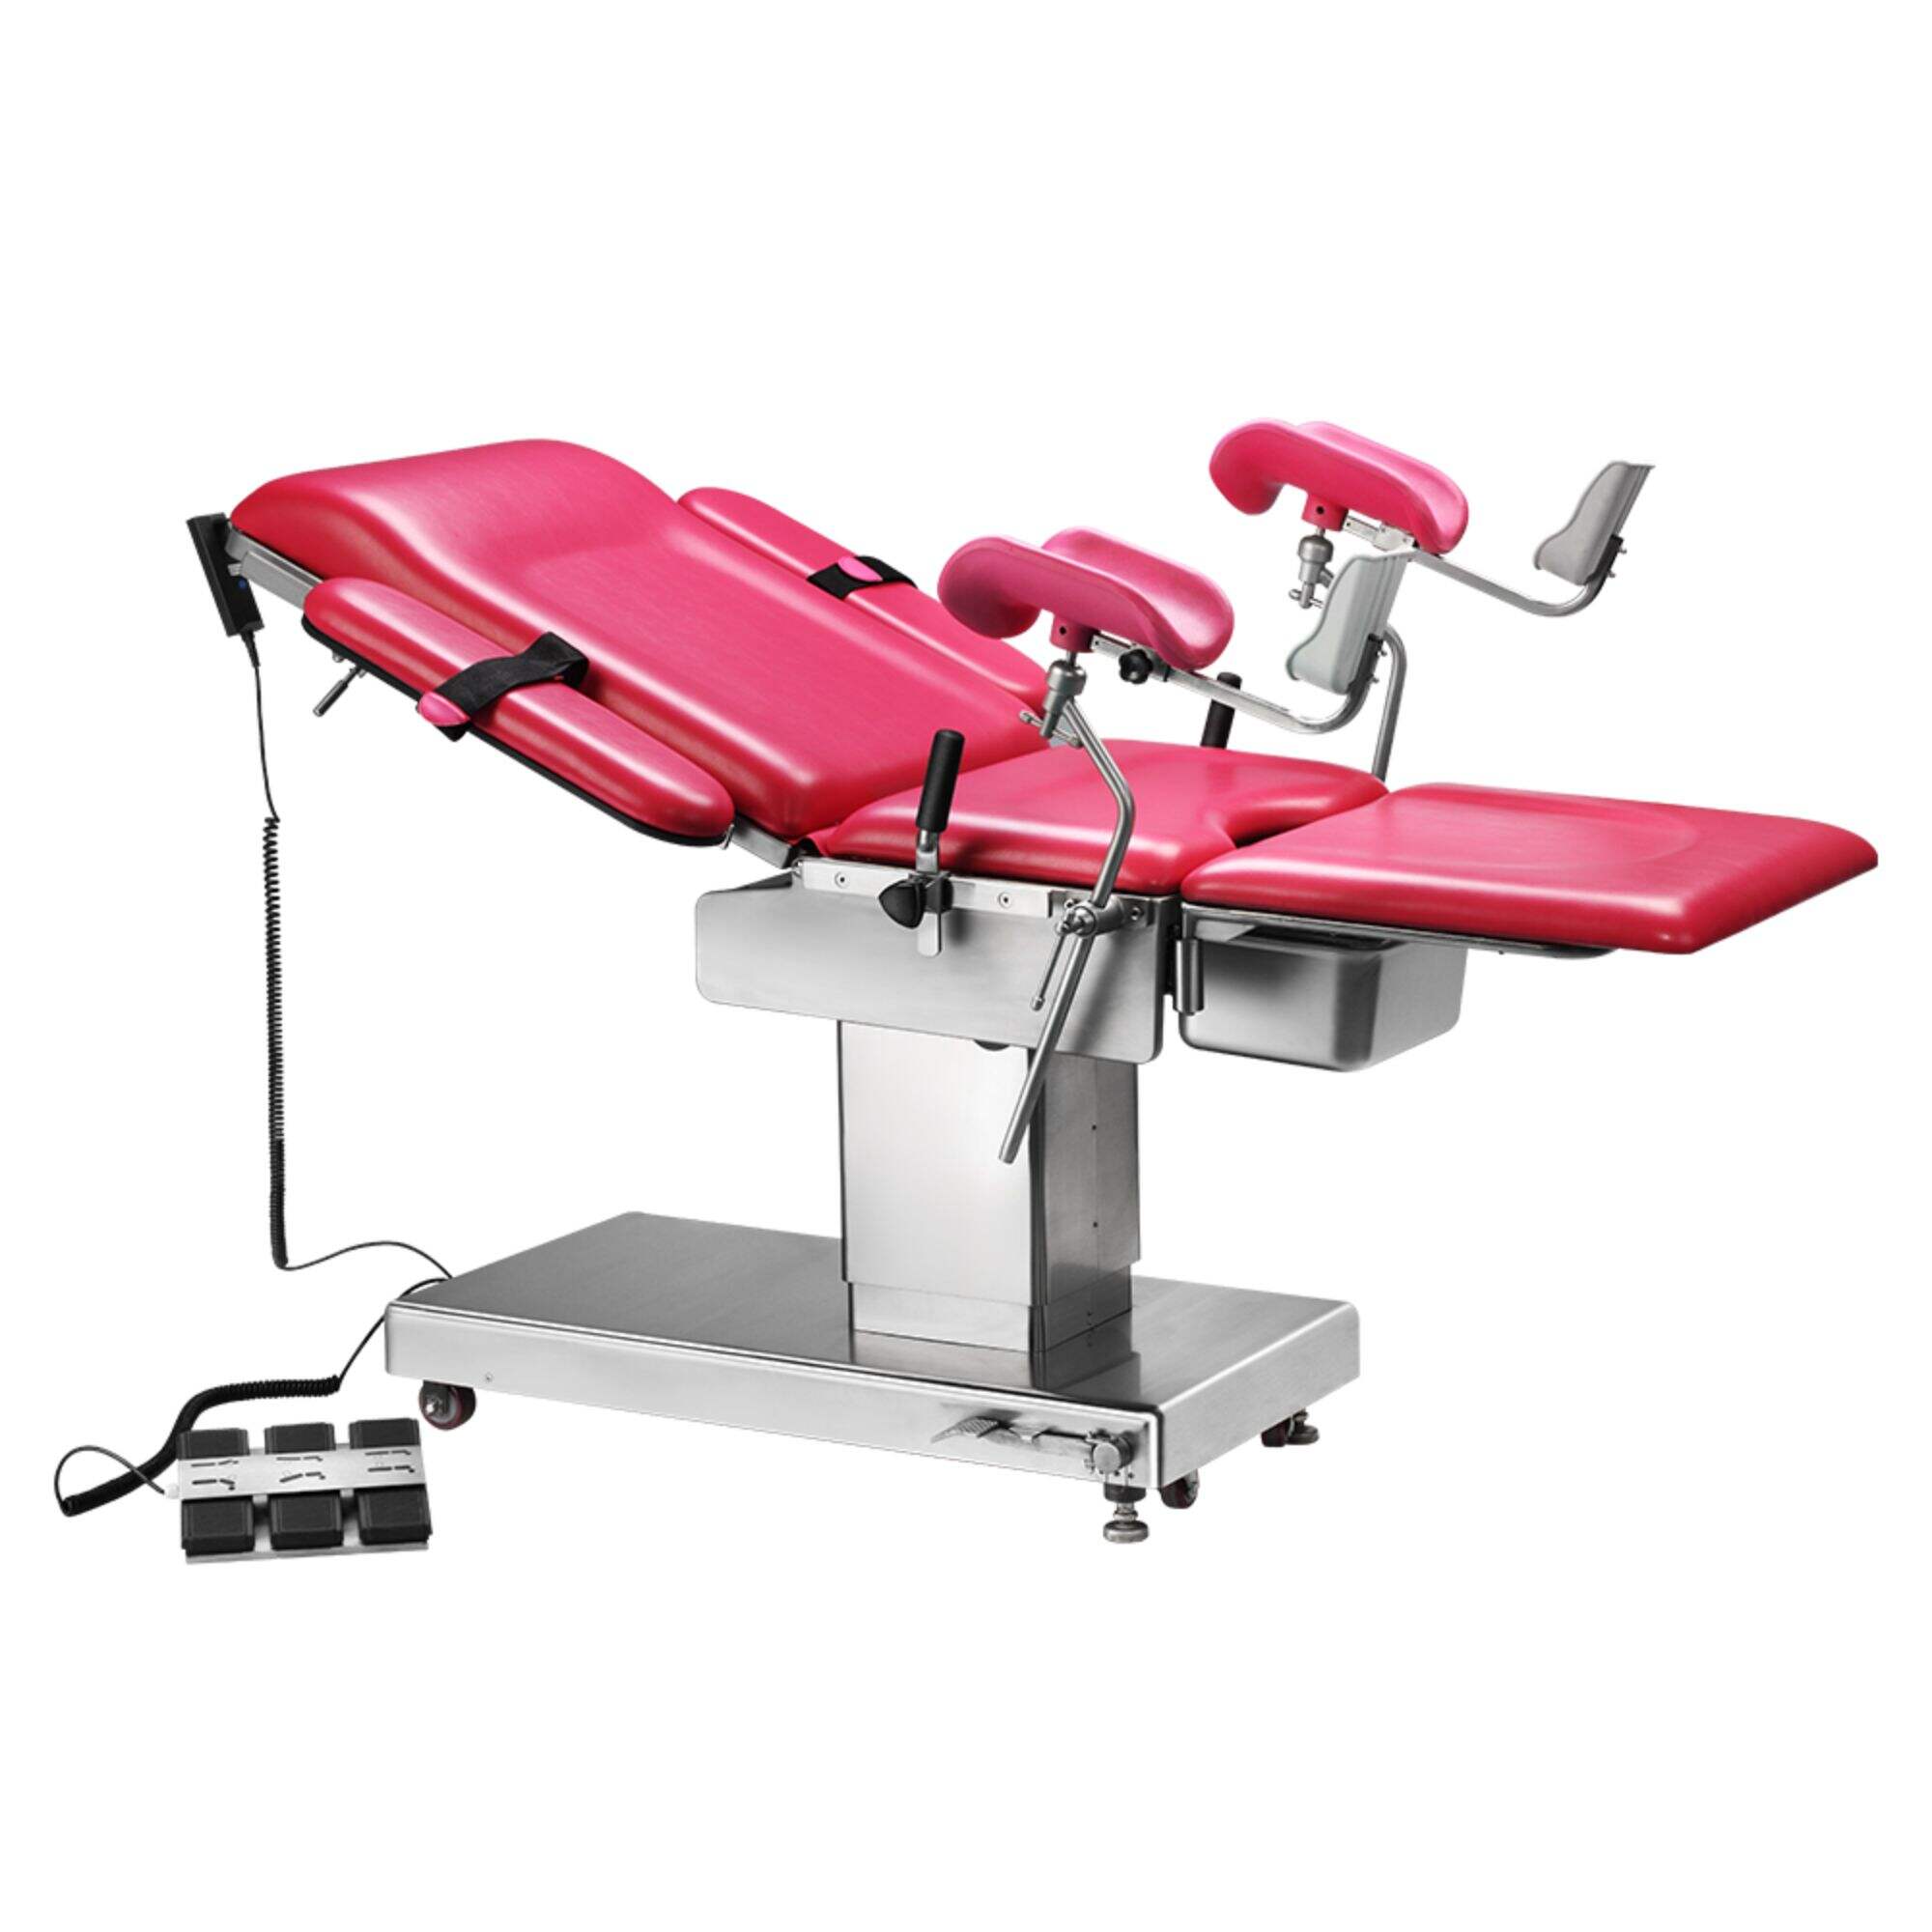 YFDC-LT01 Electric Gynecology & Obstetric Table